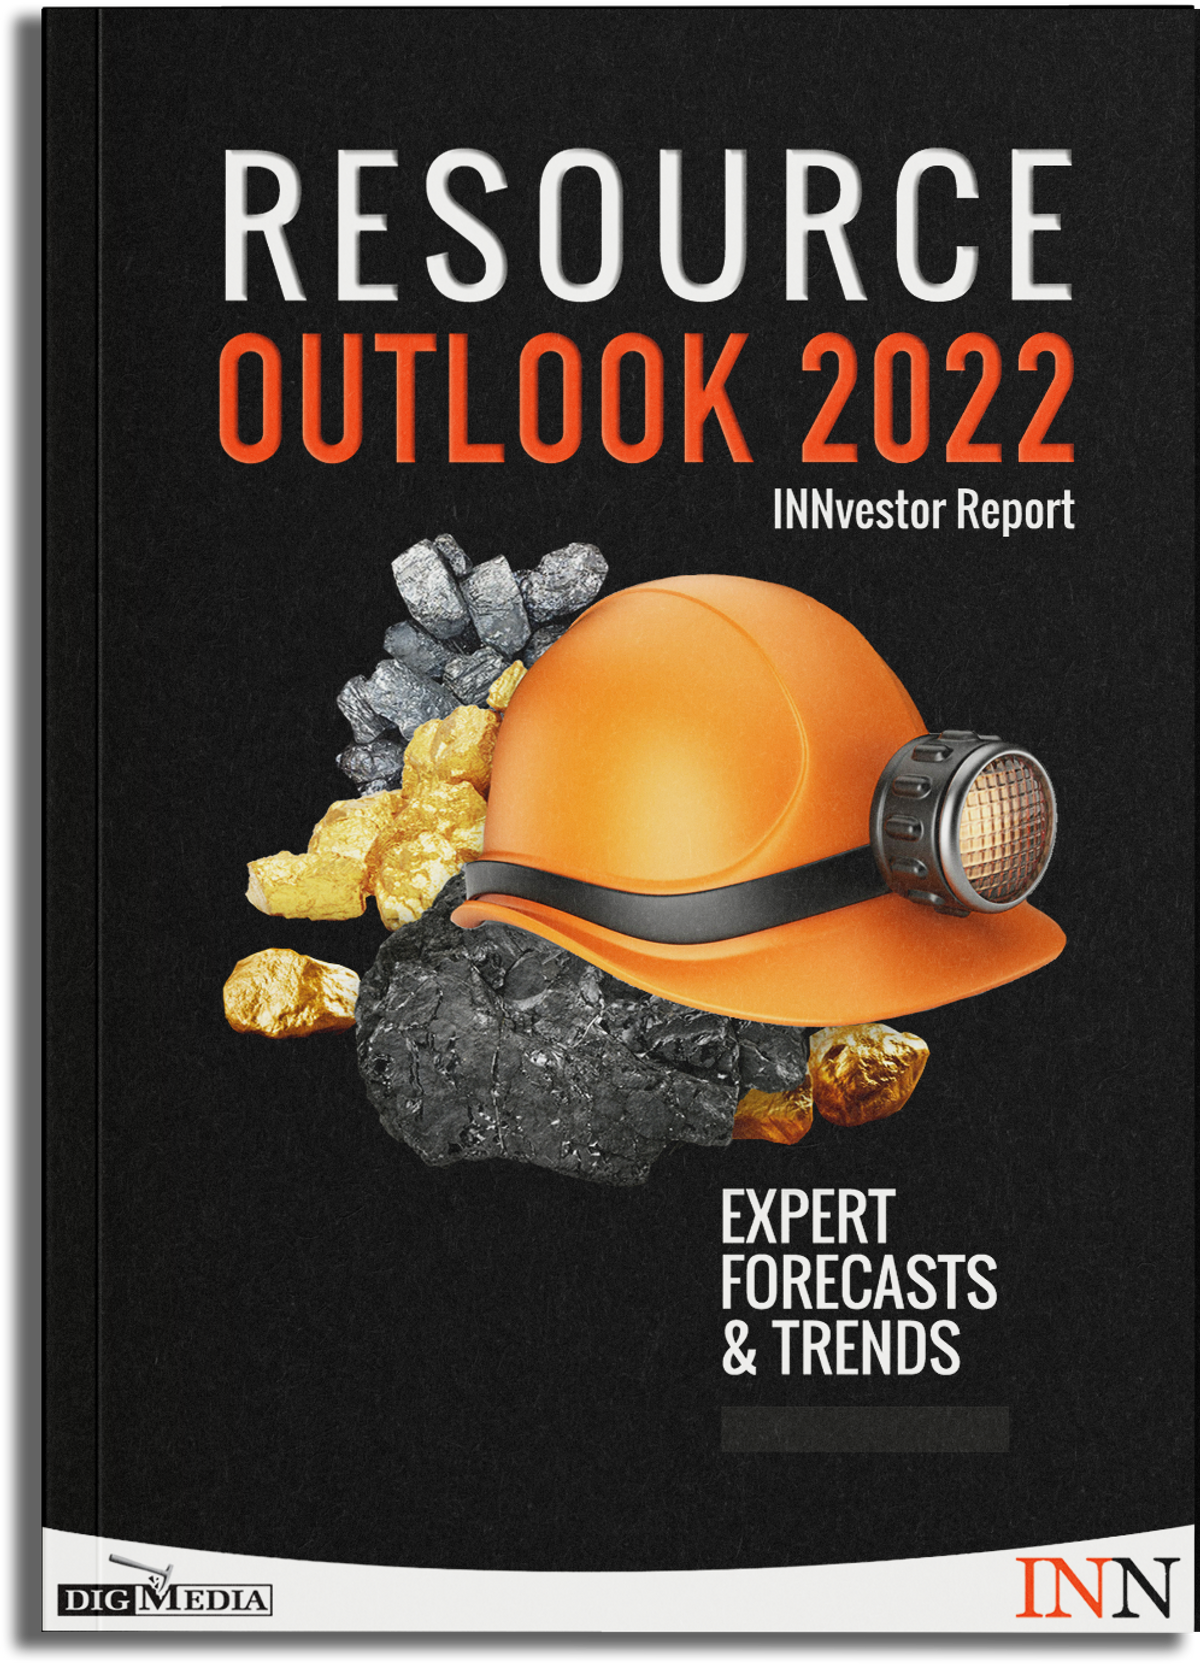 NEW! Download Your FREE 2022 Resource Outlook Report.